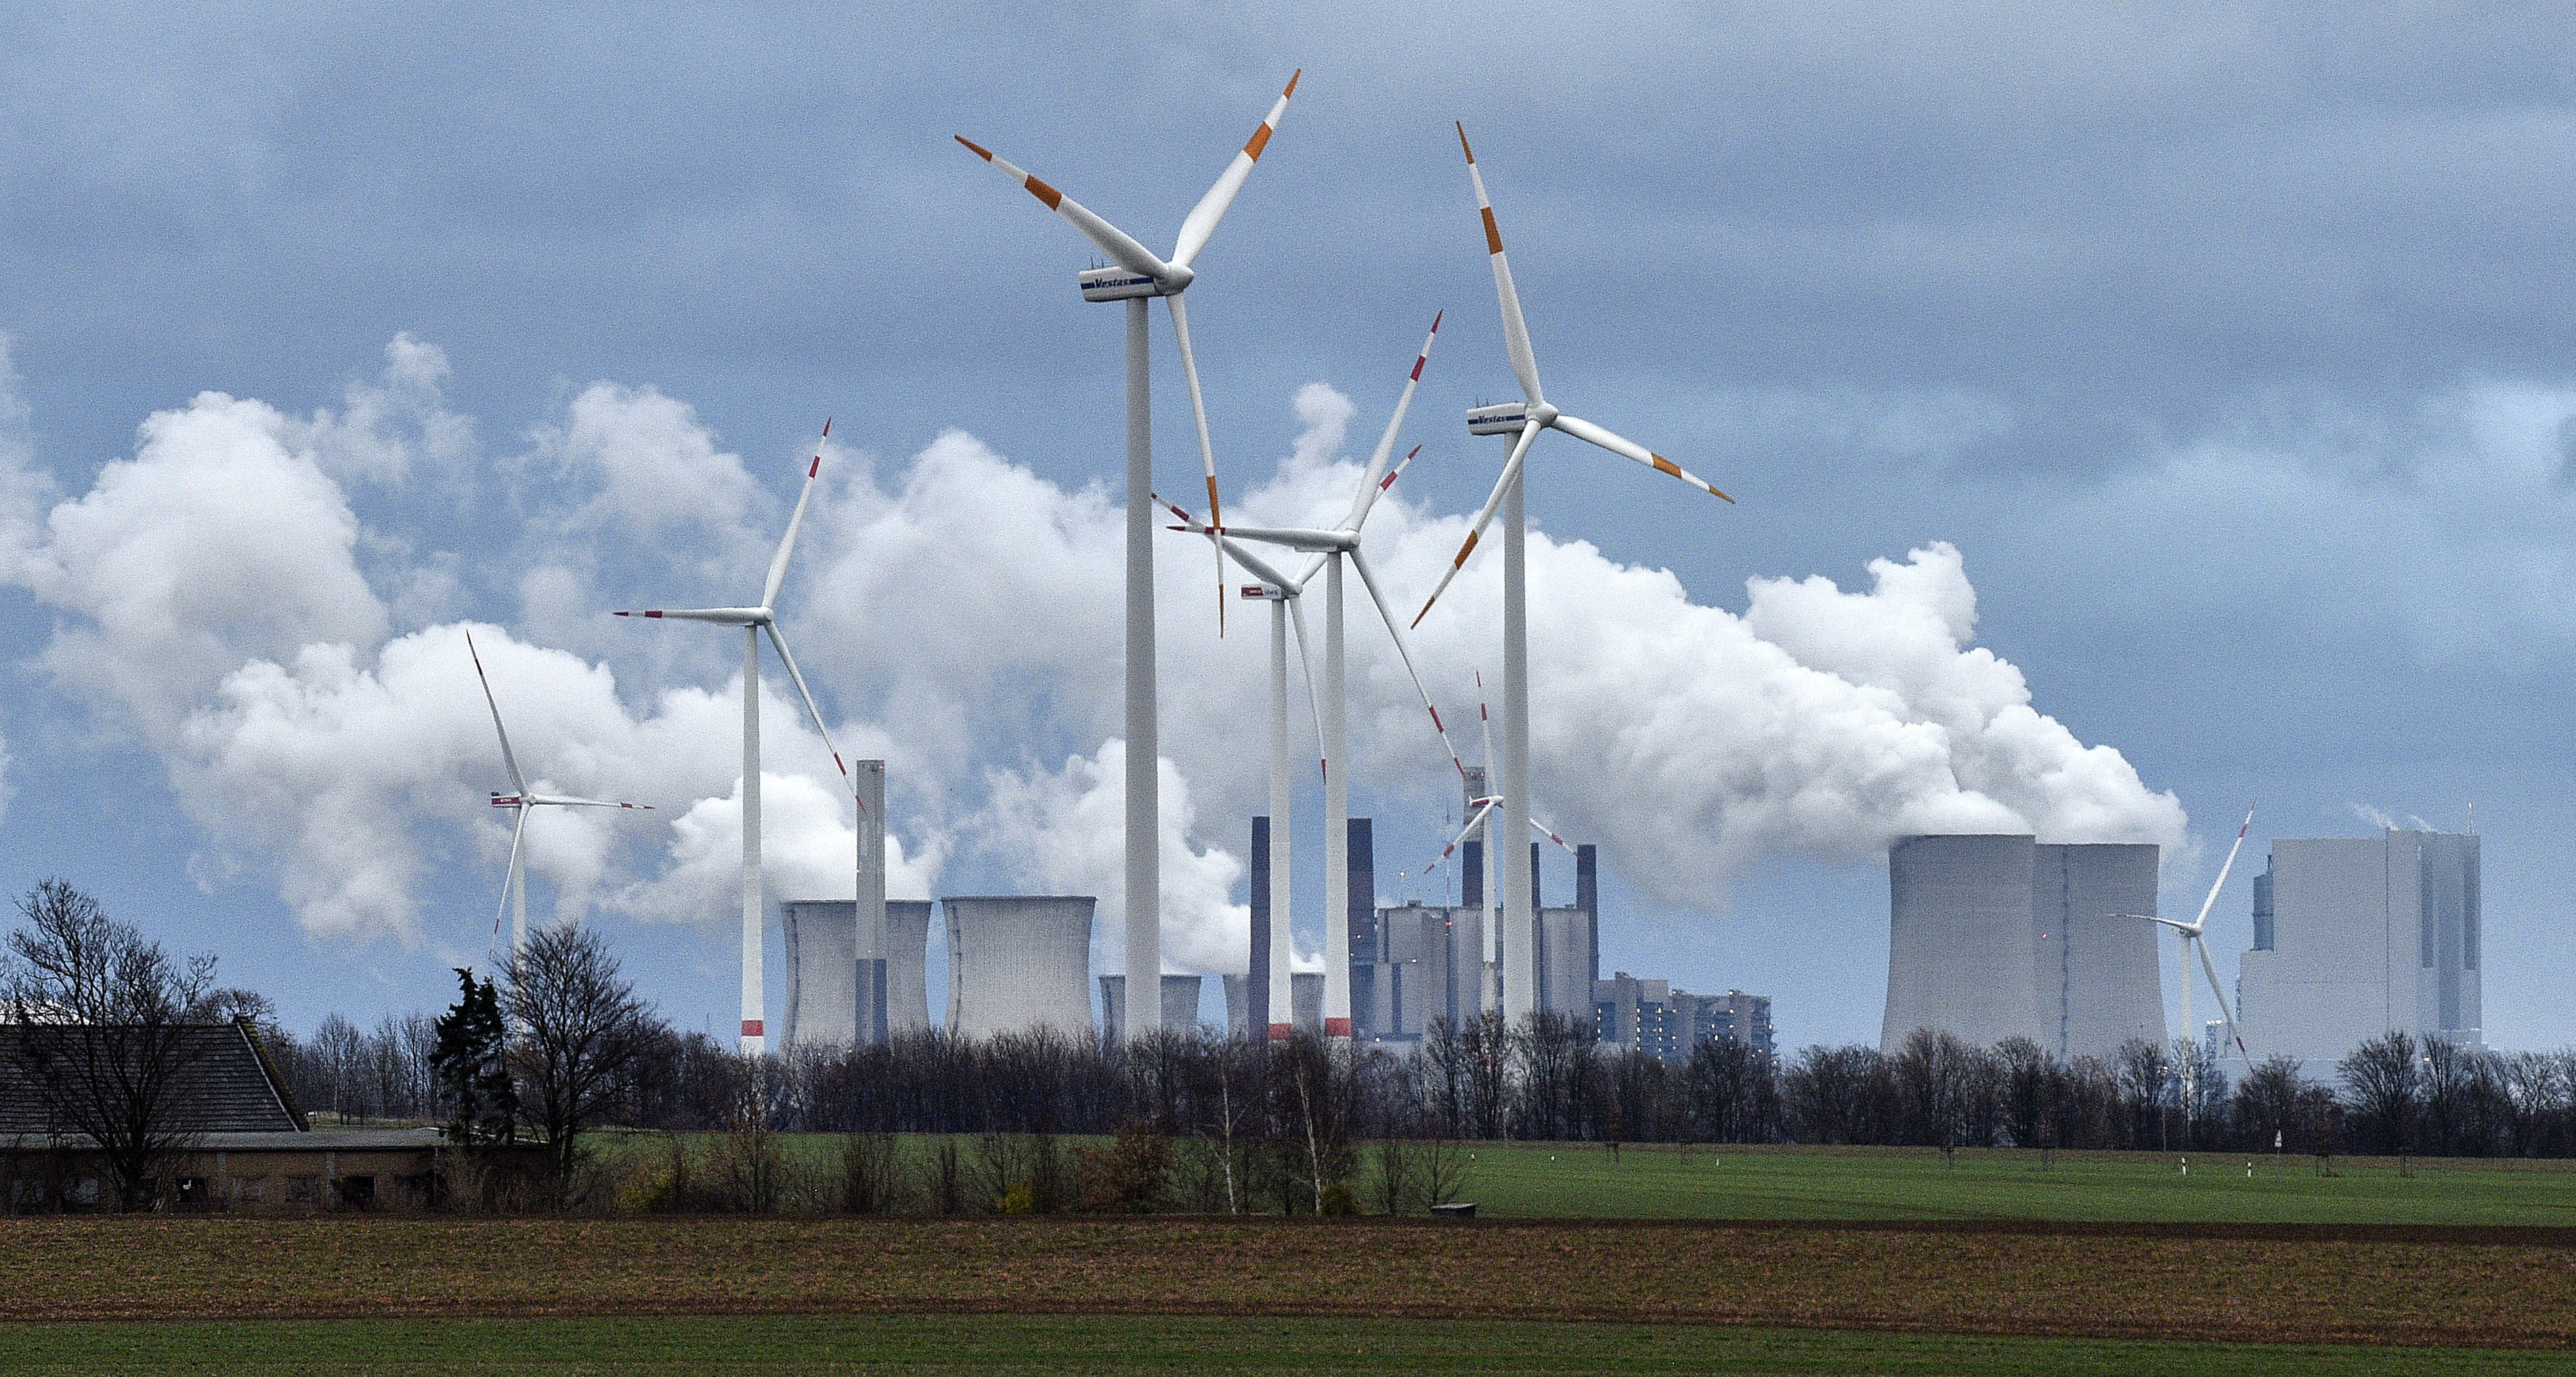 Wind turbines are seen in front of a coal-fired power plant in Germany in December 2018. The country has committed to increasing its wind power production. Photo: AP